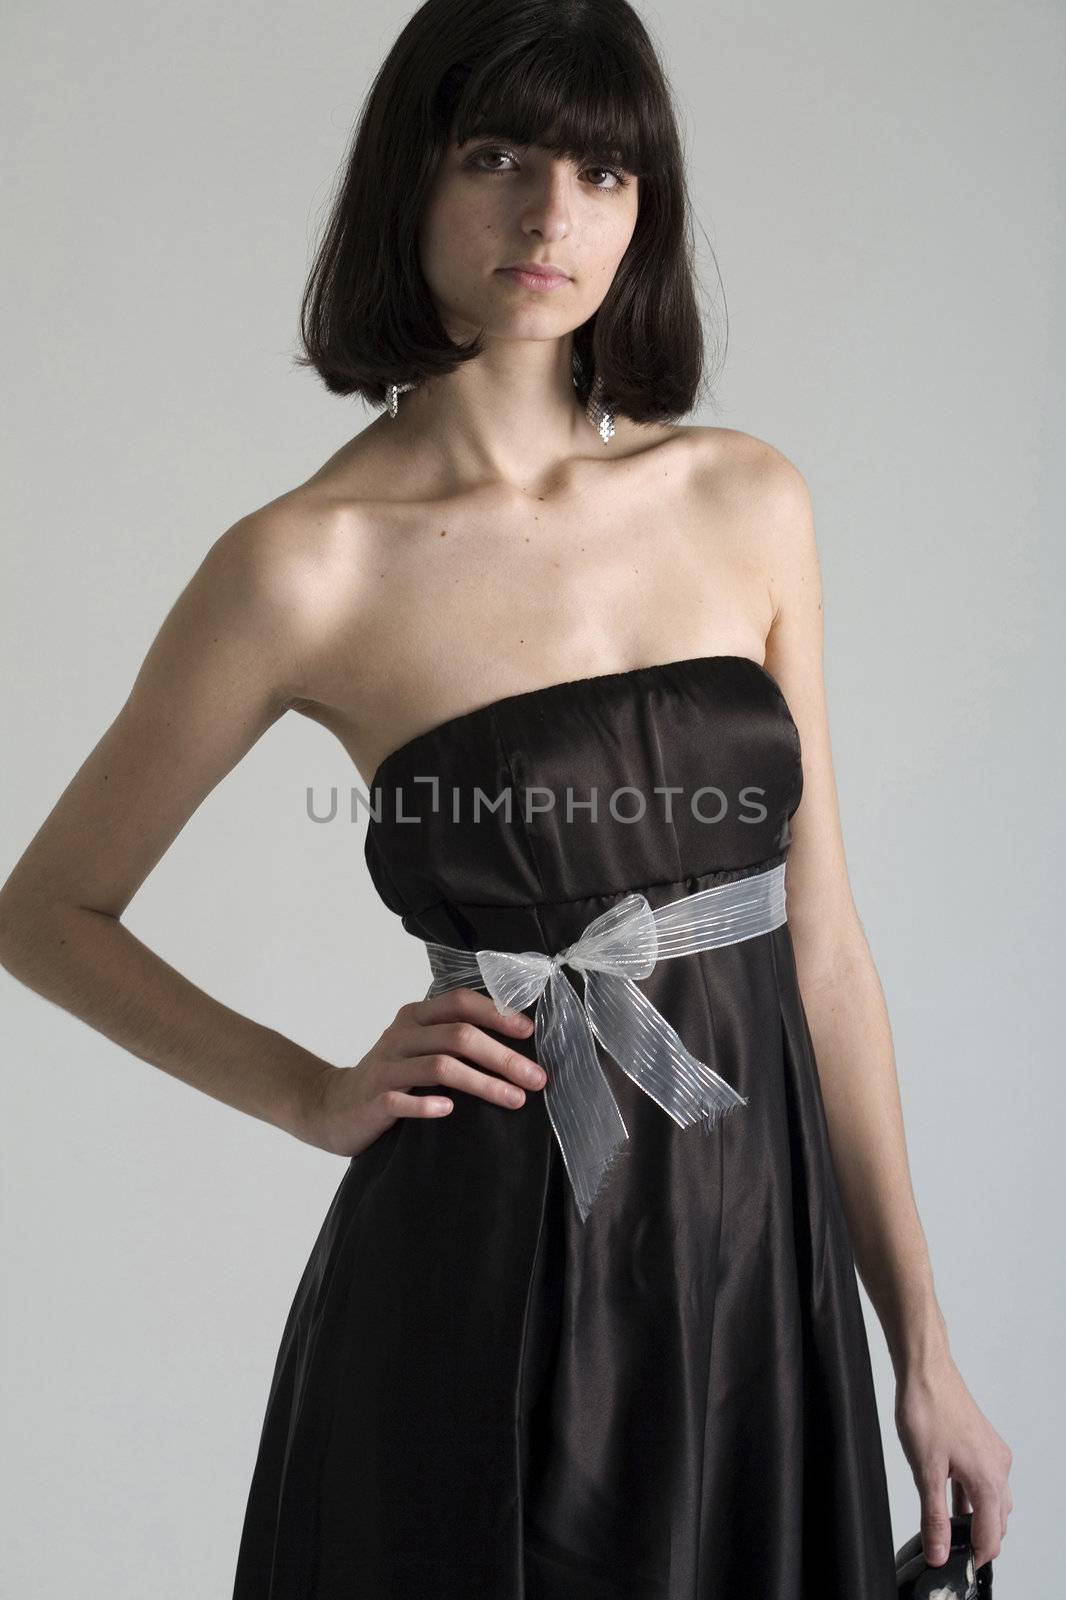 An 18 year old exotic brazilian model, with short dark hair, a young looking face and a skinny body. This was shot in a studio and she's weariing a black, strapless dress holding her shoes.